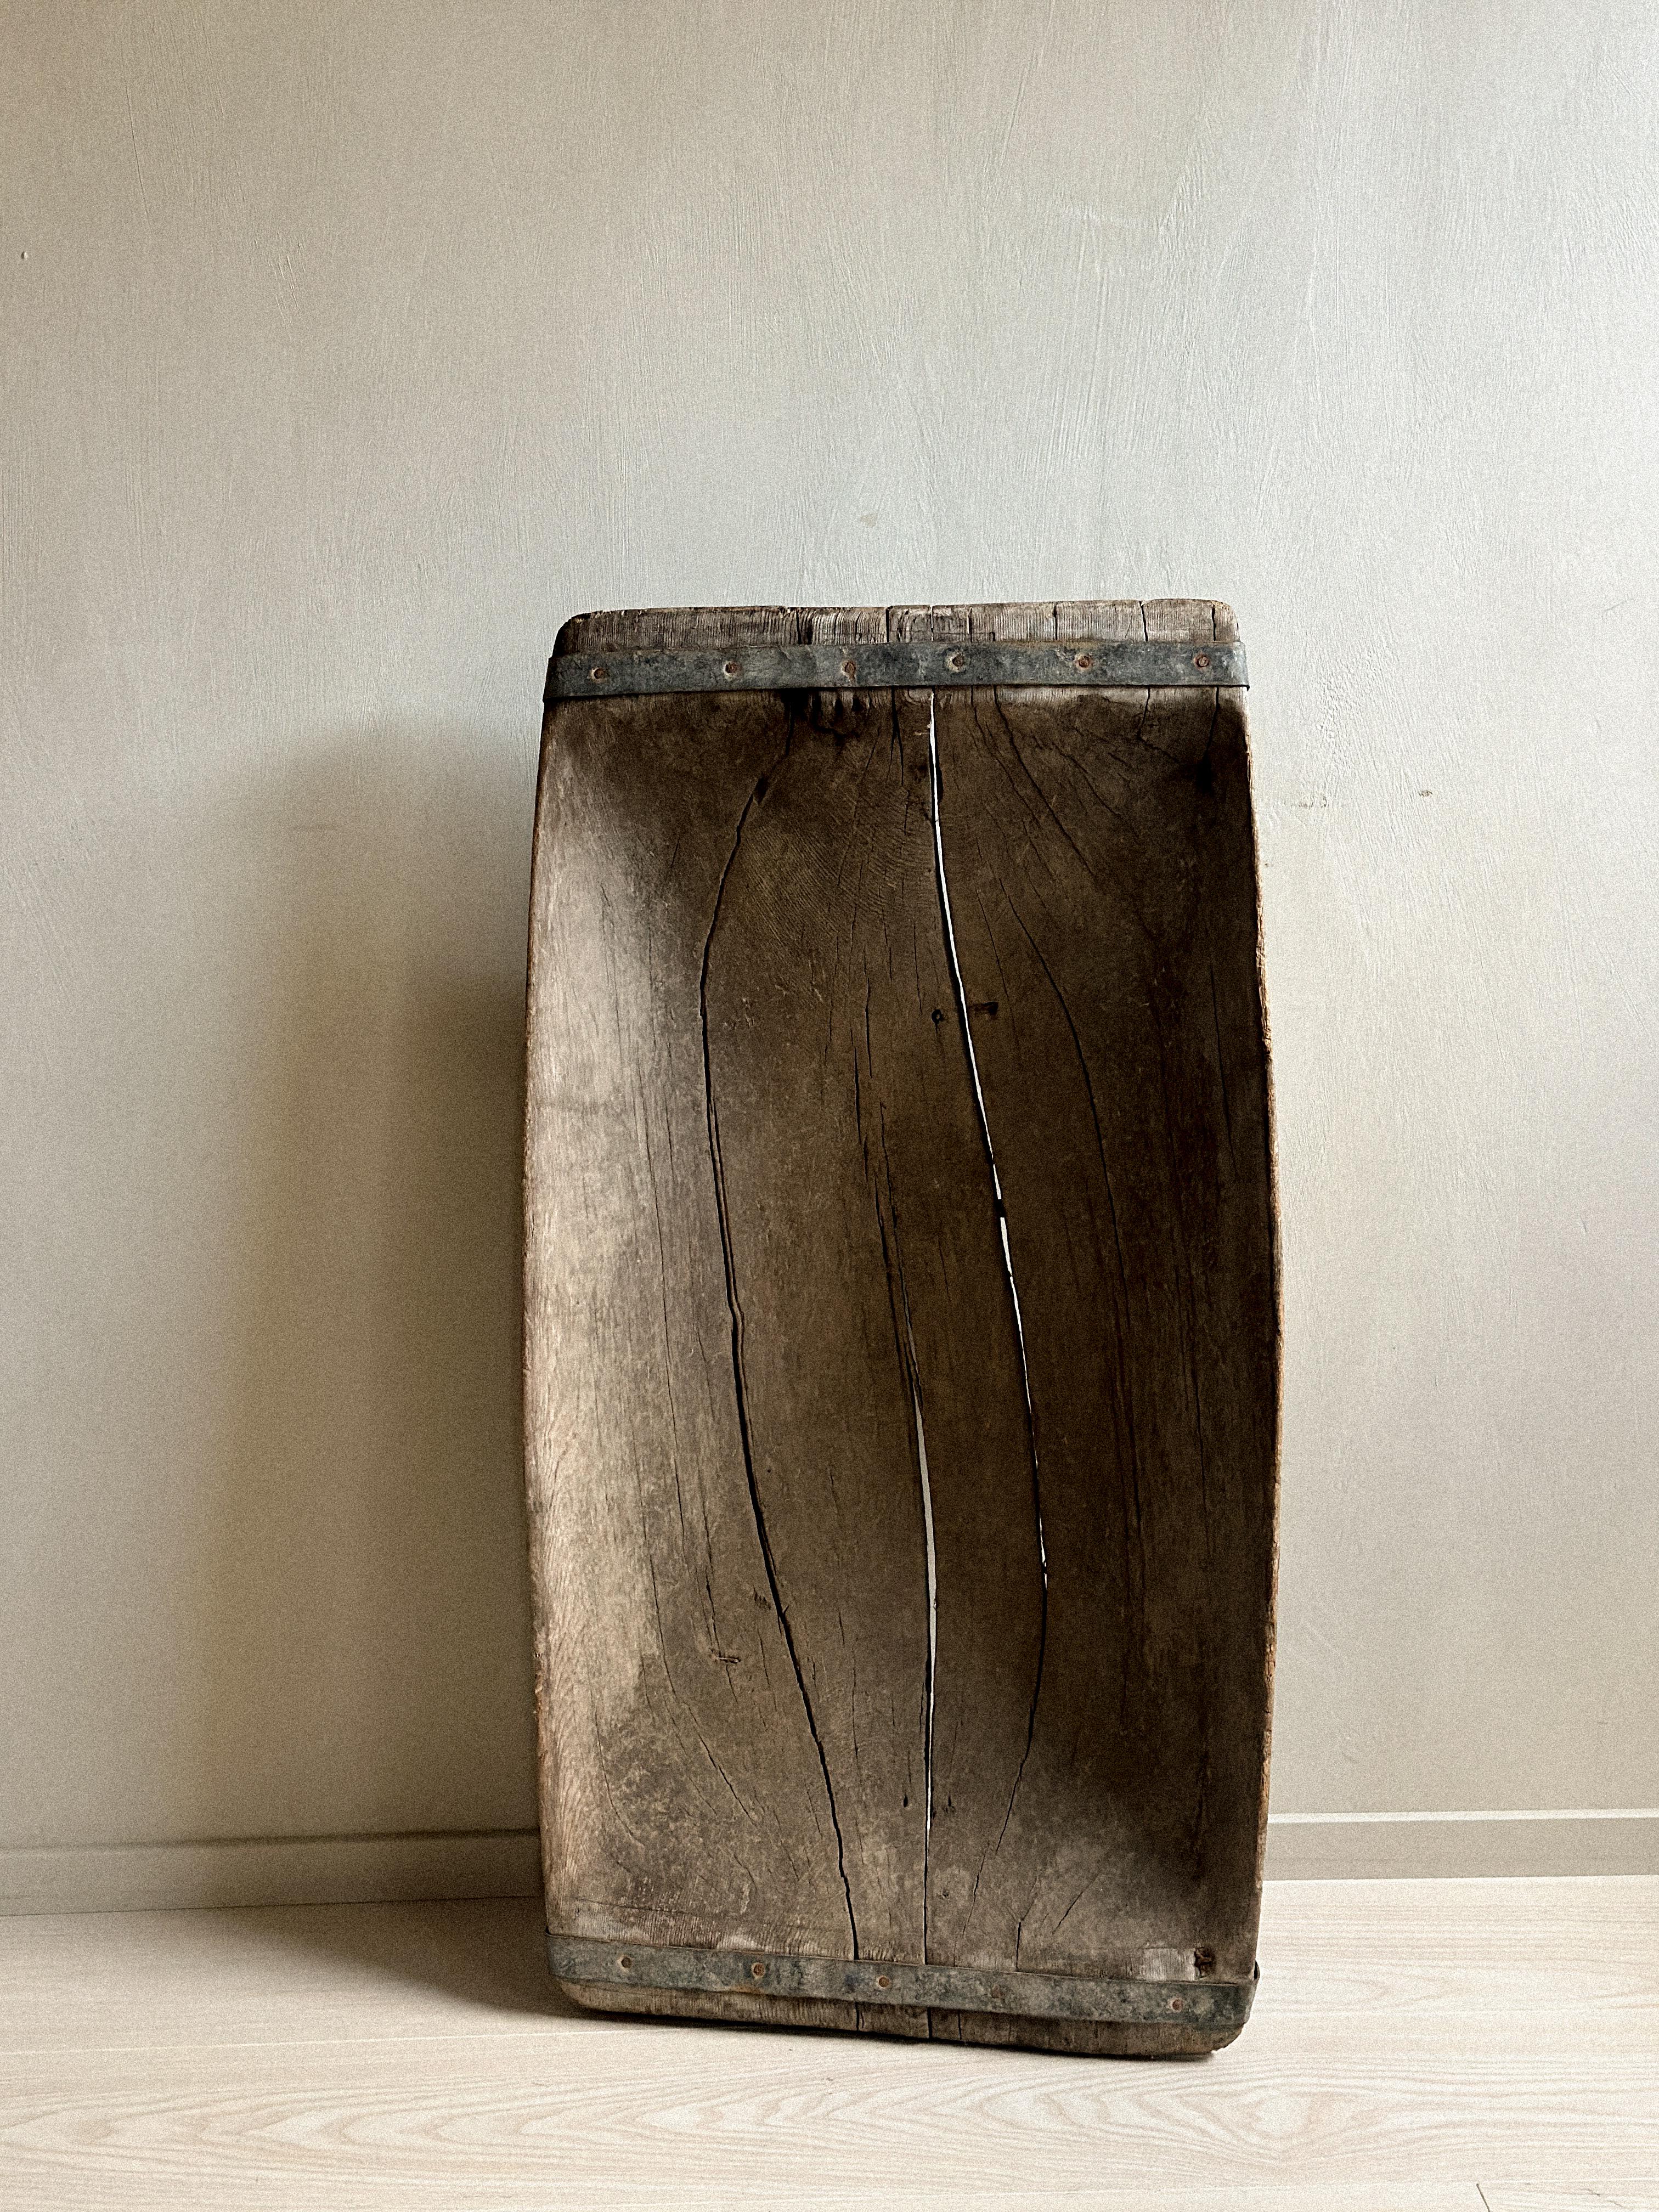 19th Century A Large Antique Wabi Sabi Wooden Tray, Scandinavia c. 1800s  For Sale